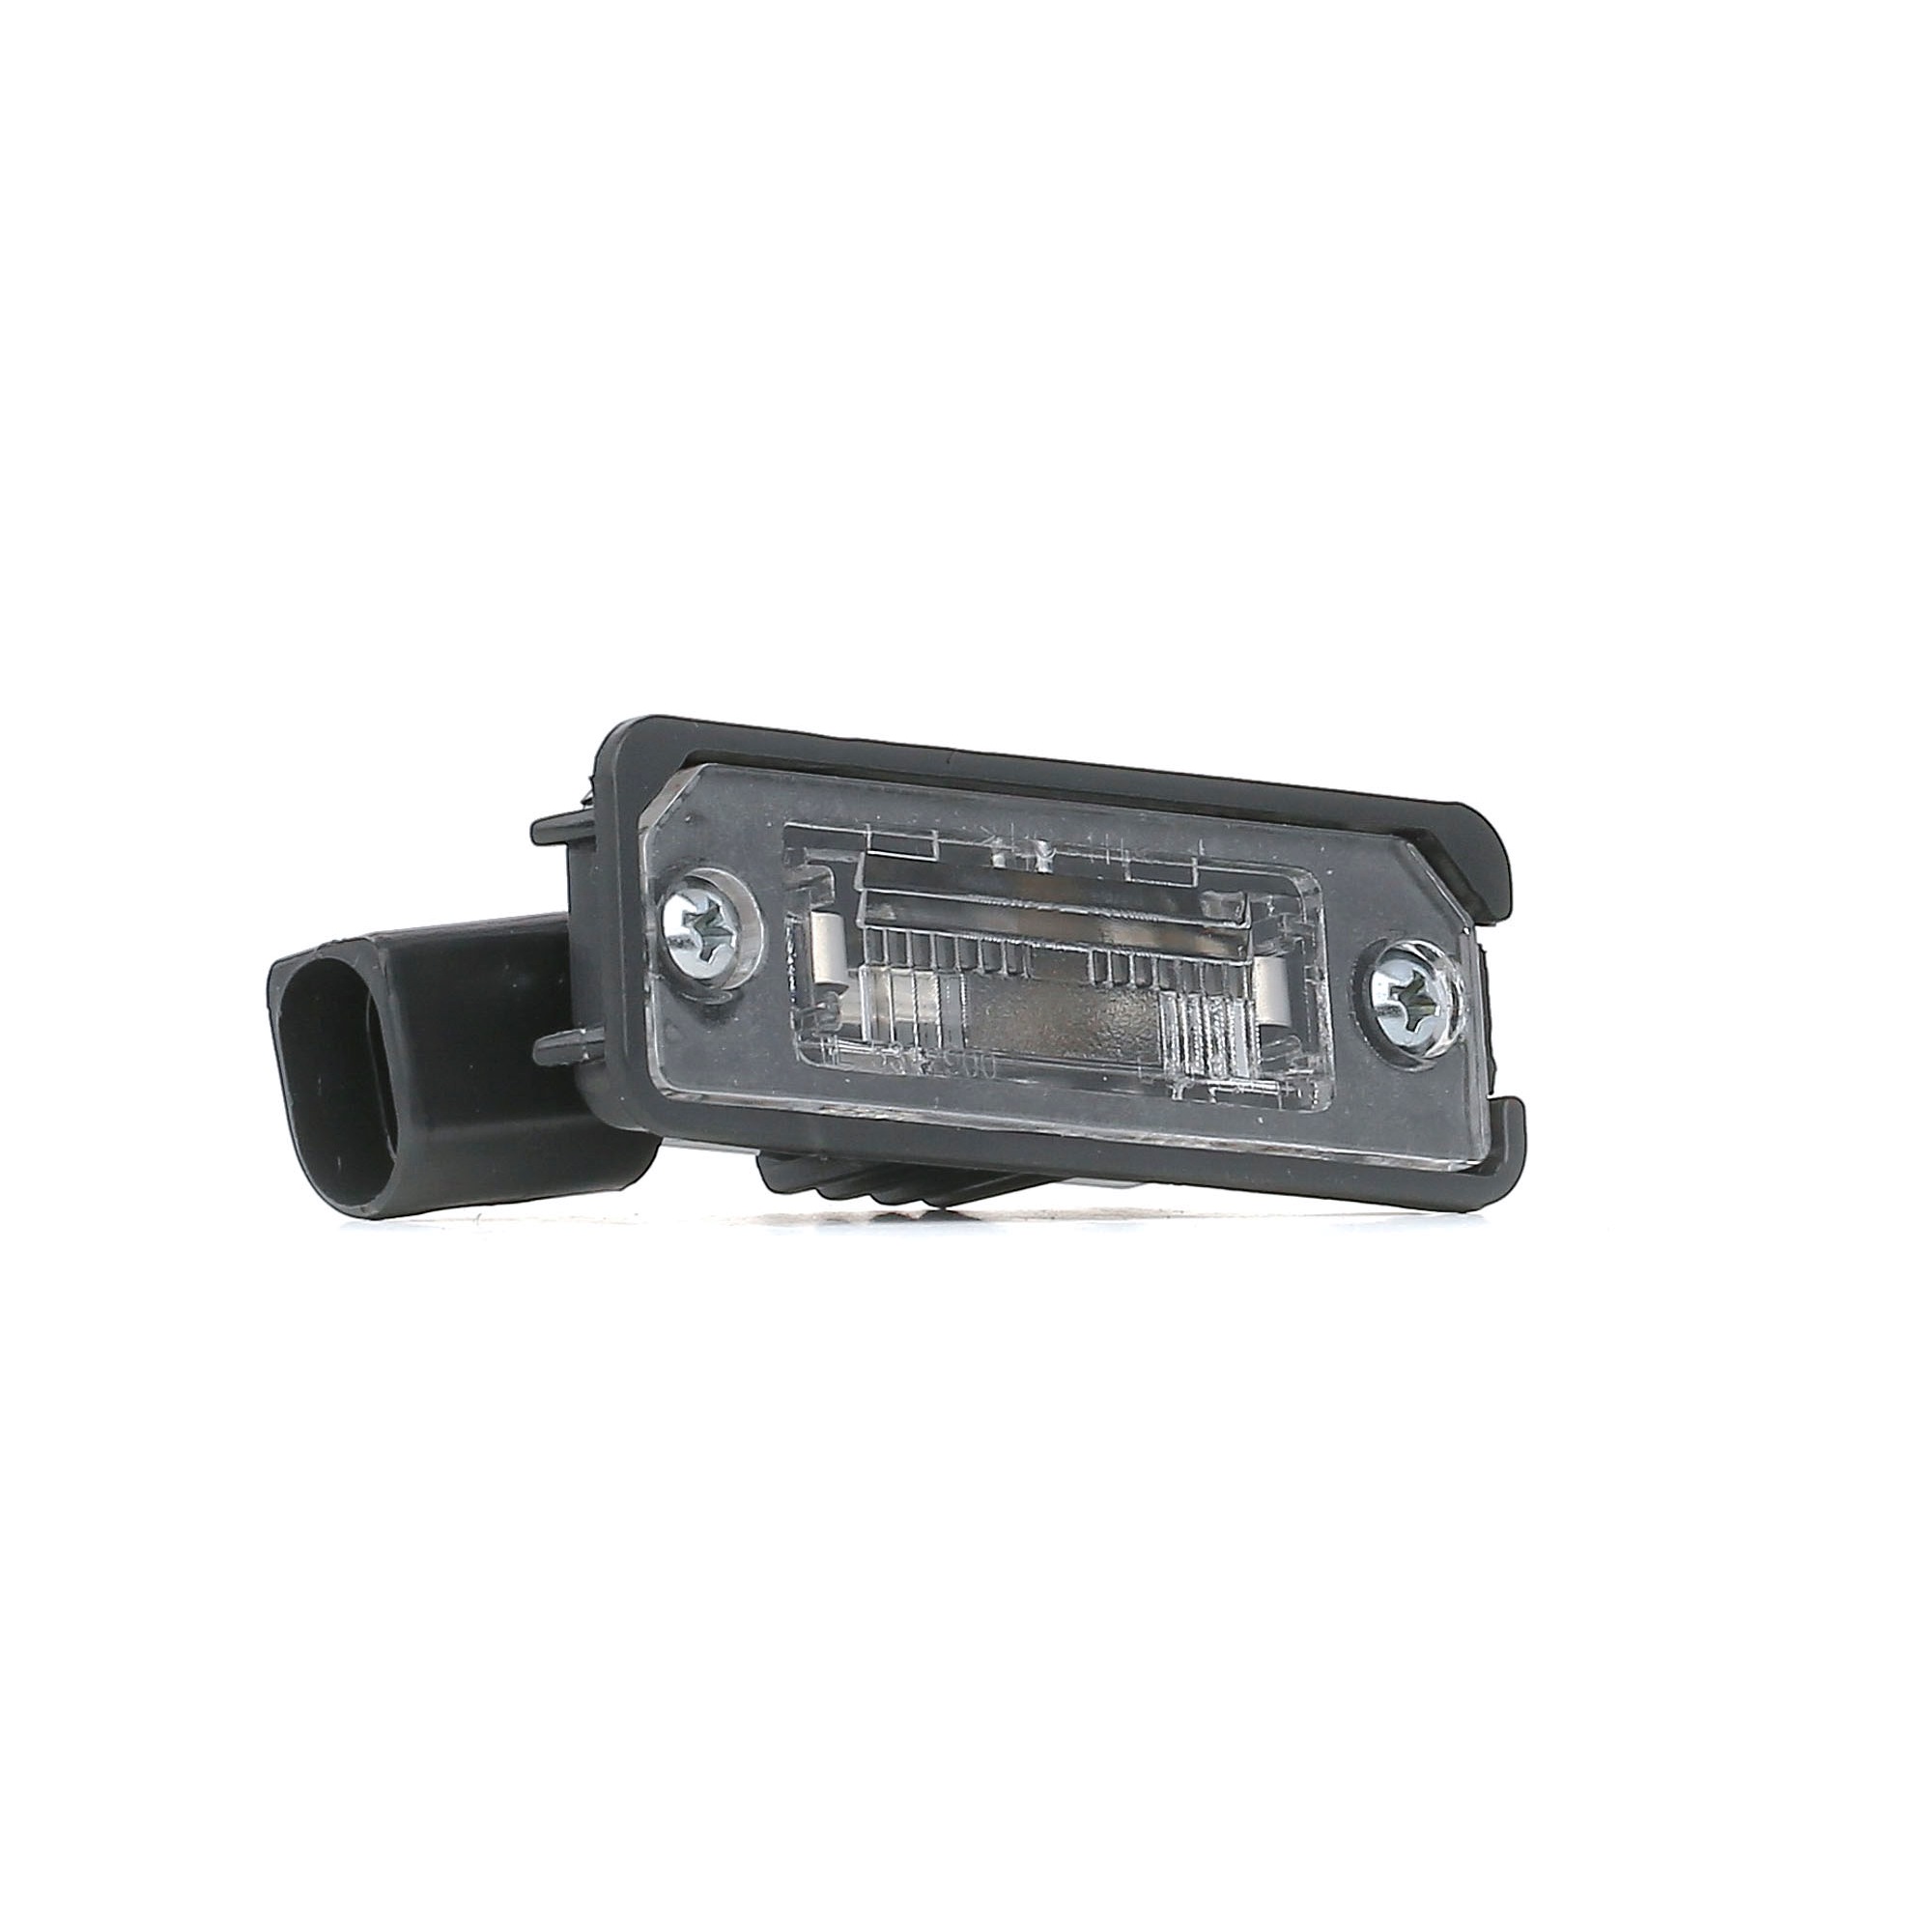 BLIC 5402-053-10-905 Licence Plate Light both sides, with bulb